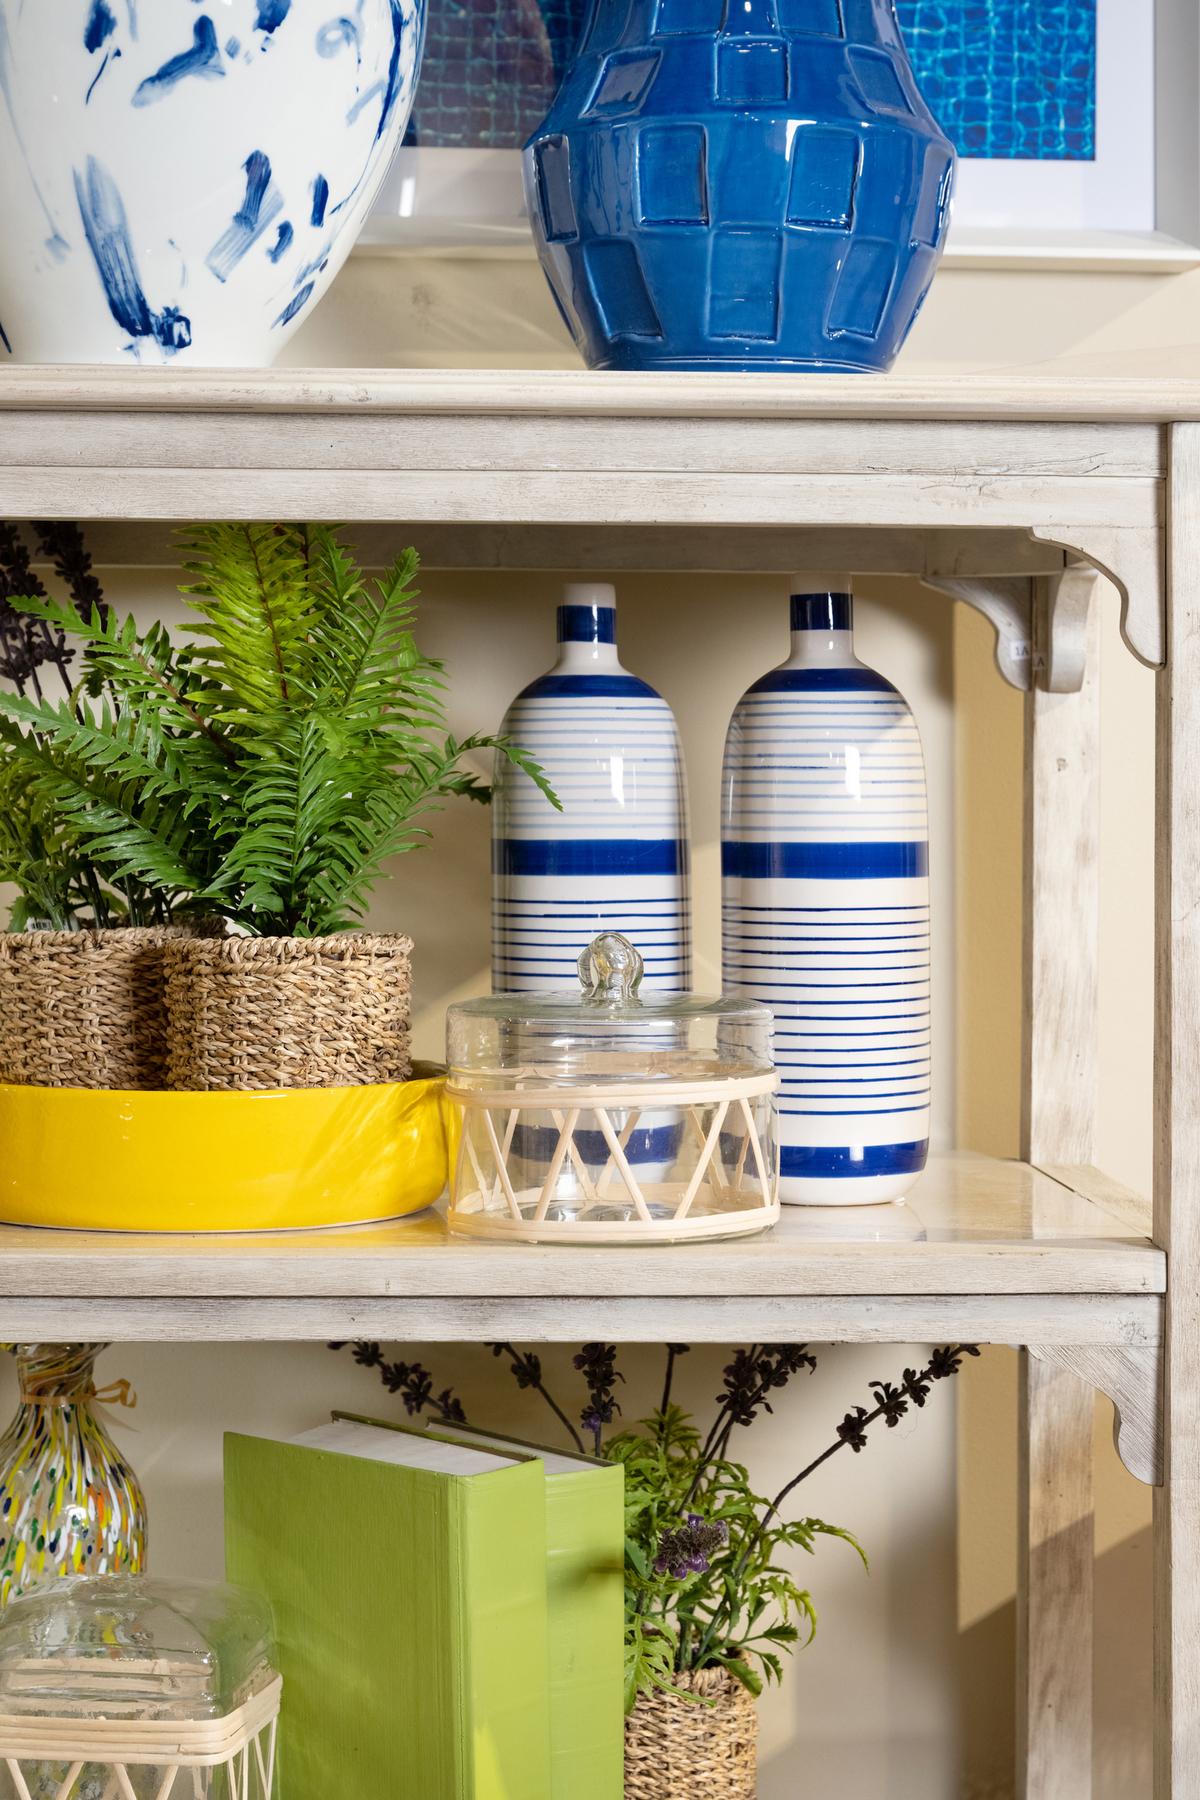 Rattan and glass canisters add texture and interest to a cheery shelf. (Handout/TNS)